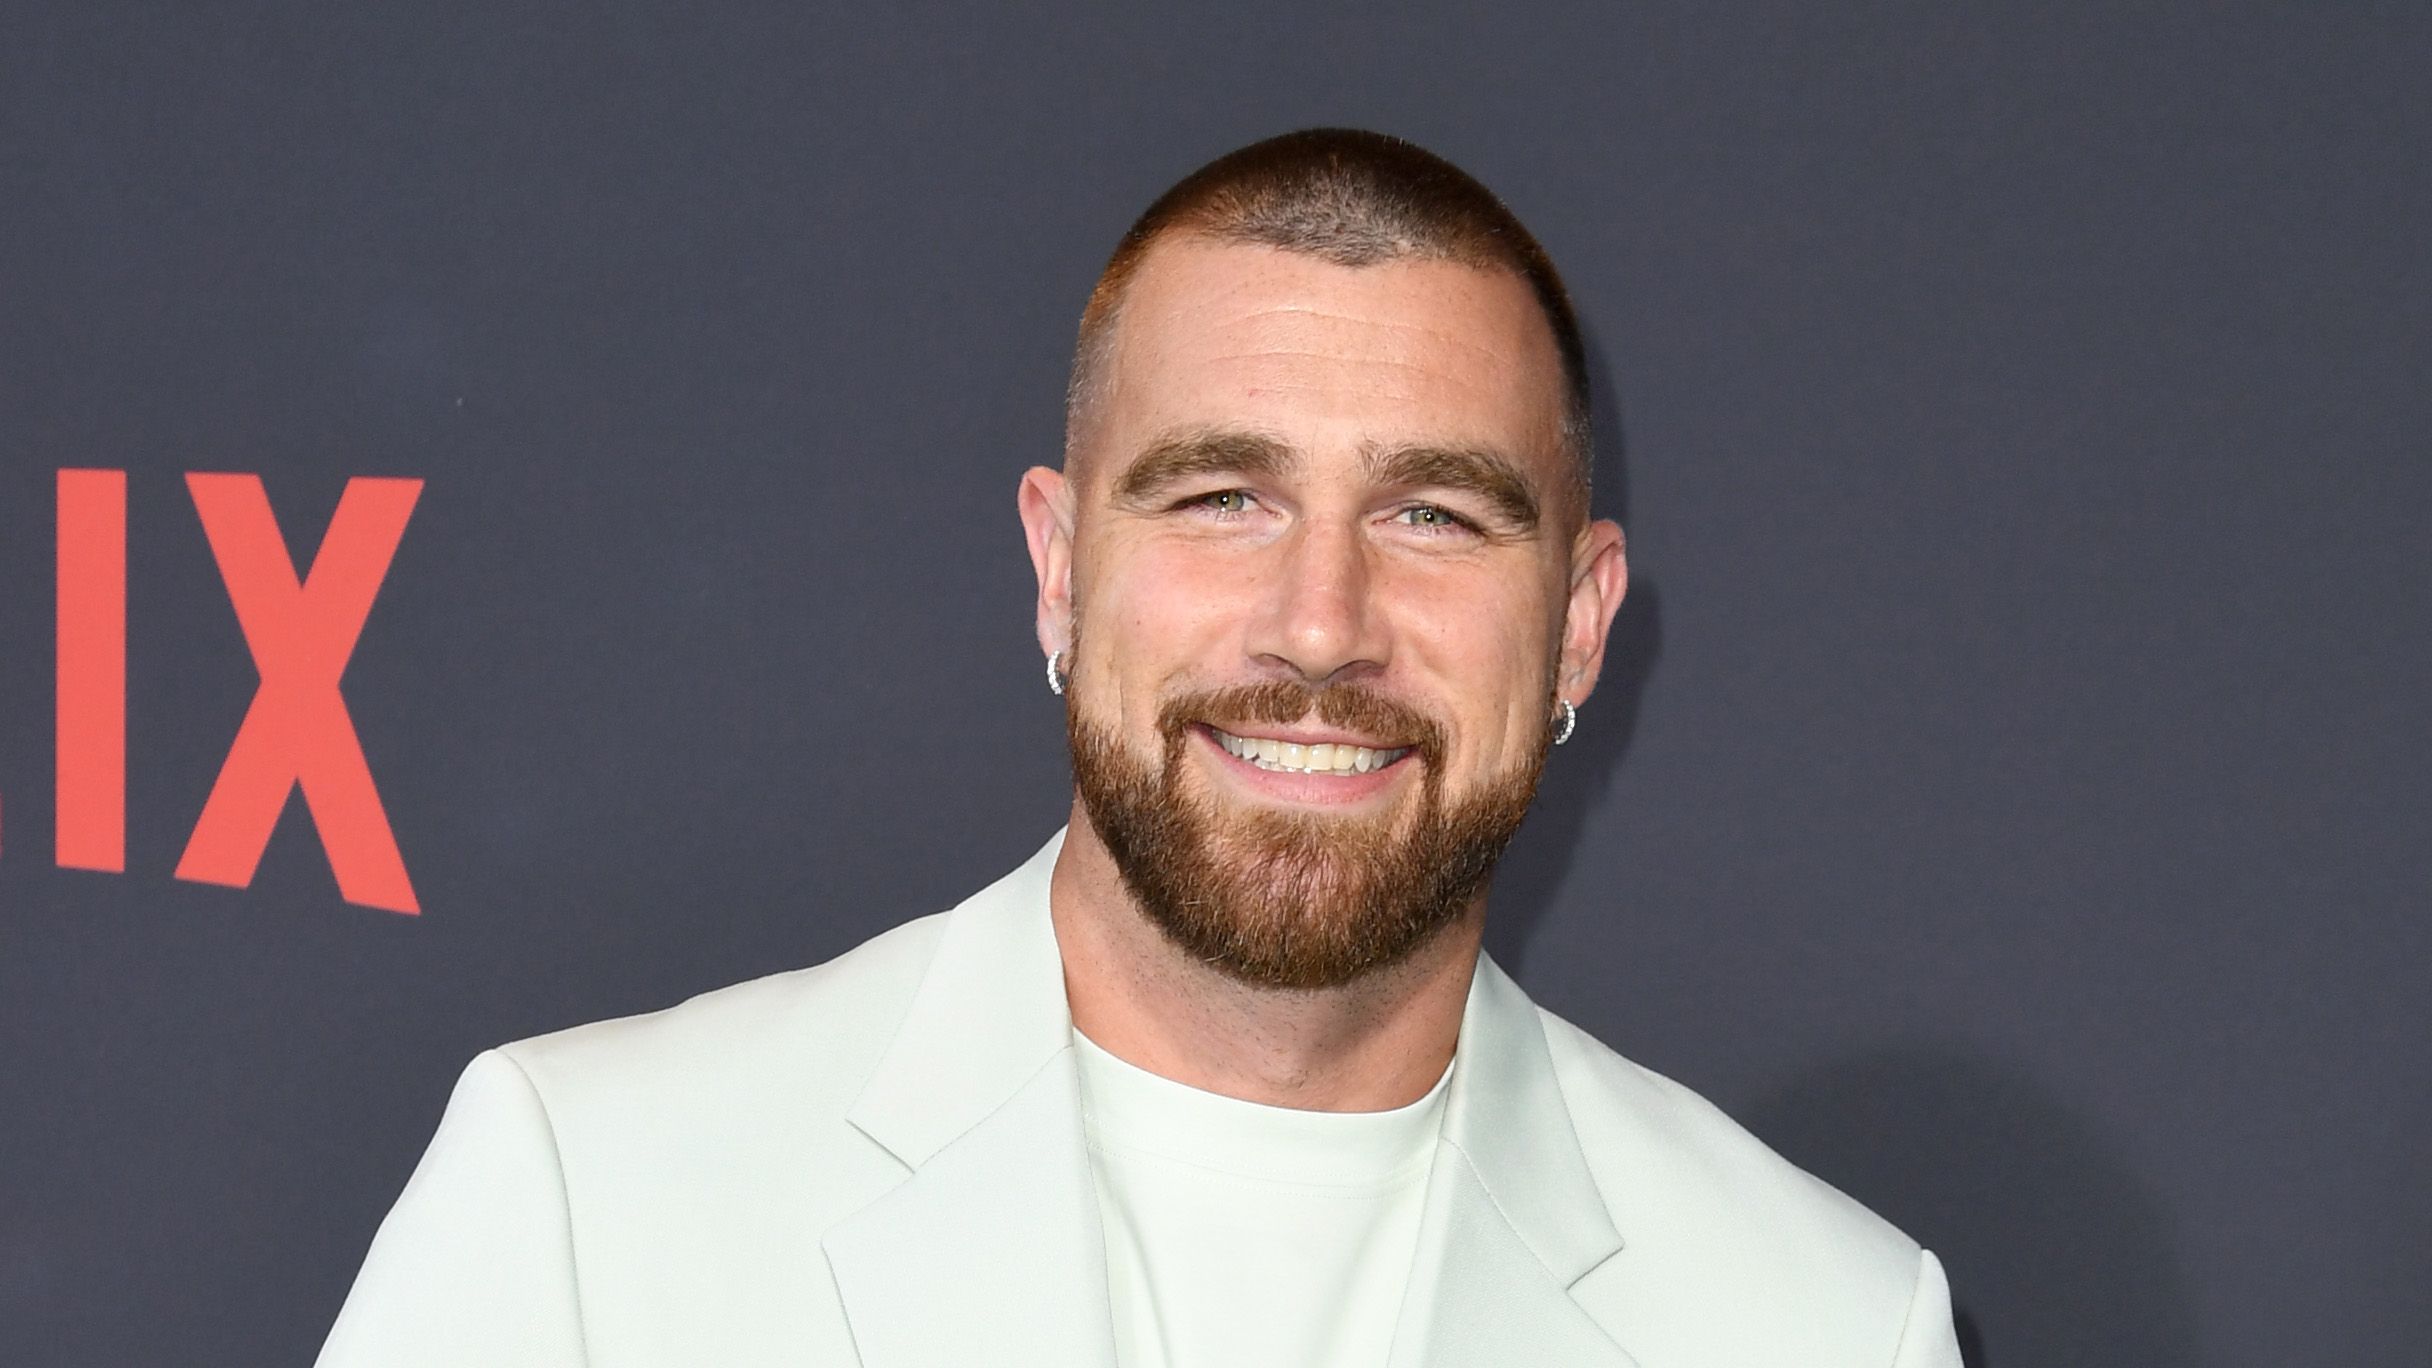 Catch Him if You Can: NFL Star Travis Kelce Talks Life and Love